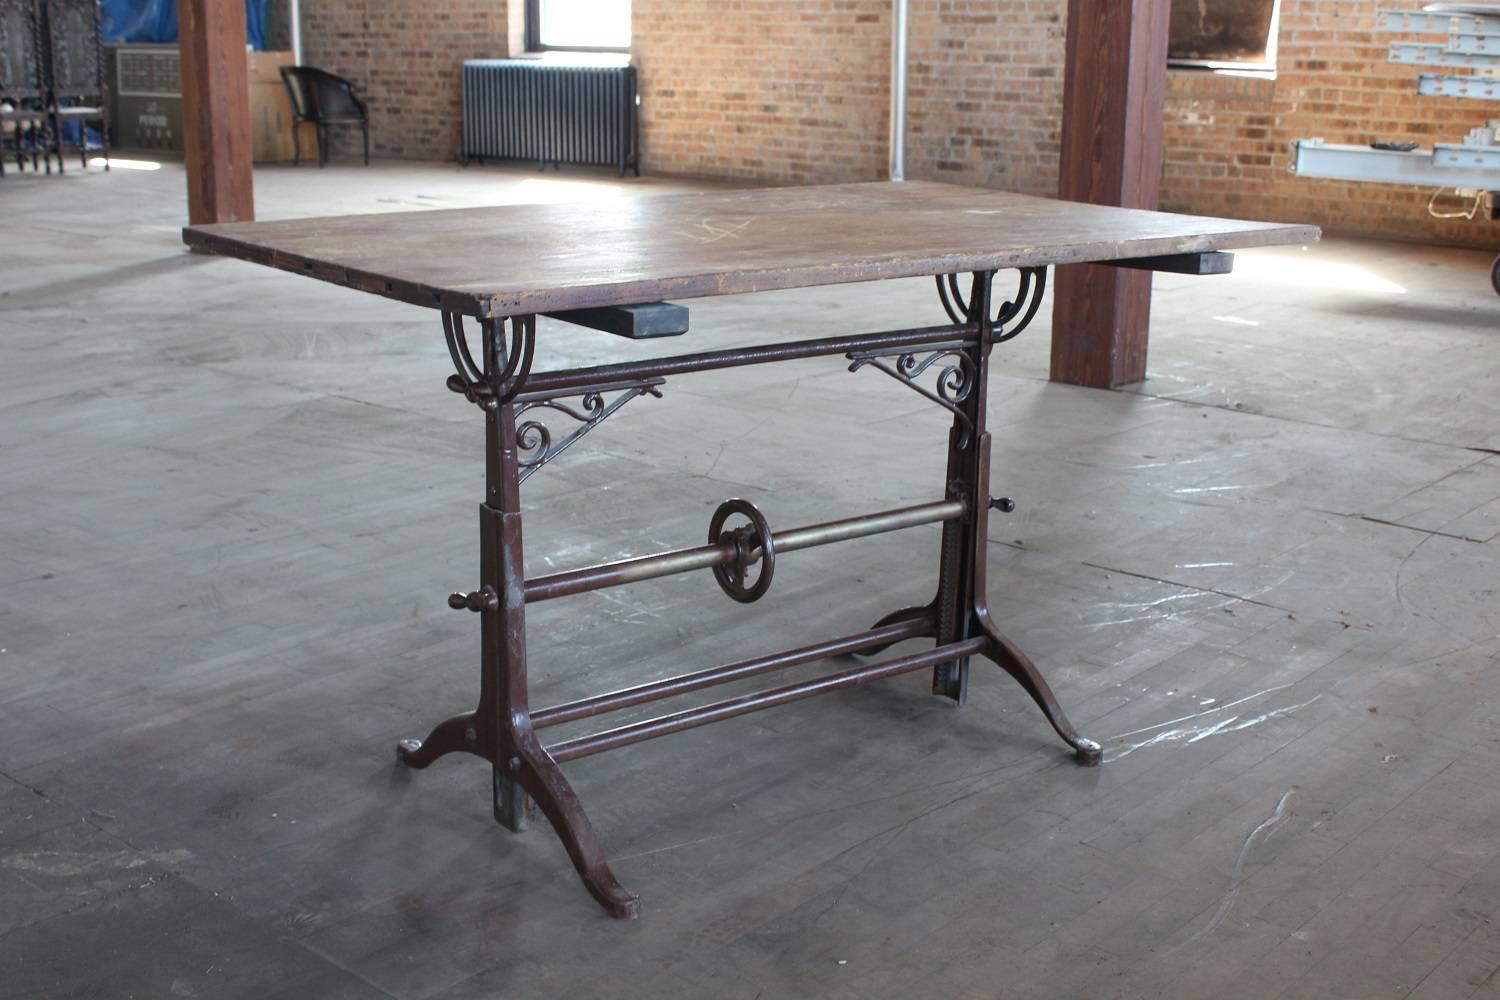 Antique drafting table with cast iron base and wood top. Measures: Height is adjustable from 33.25